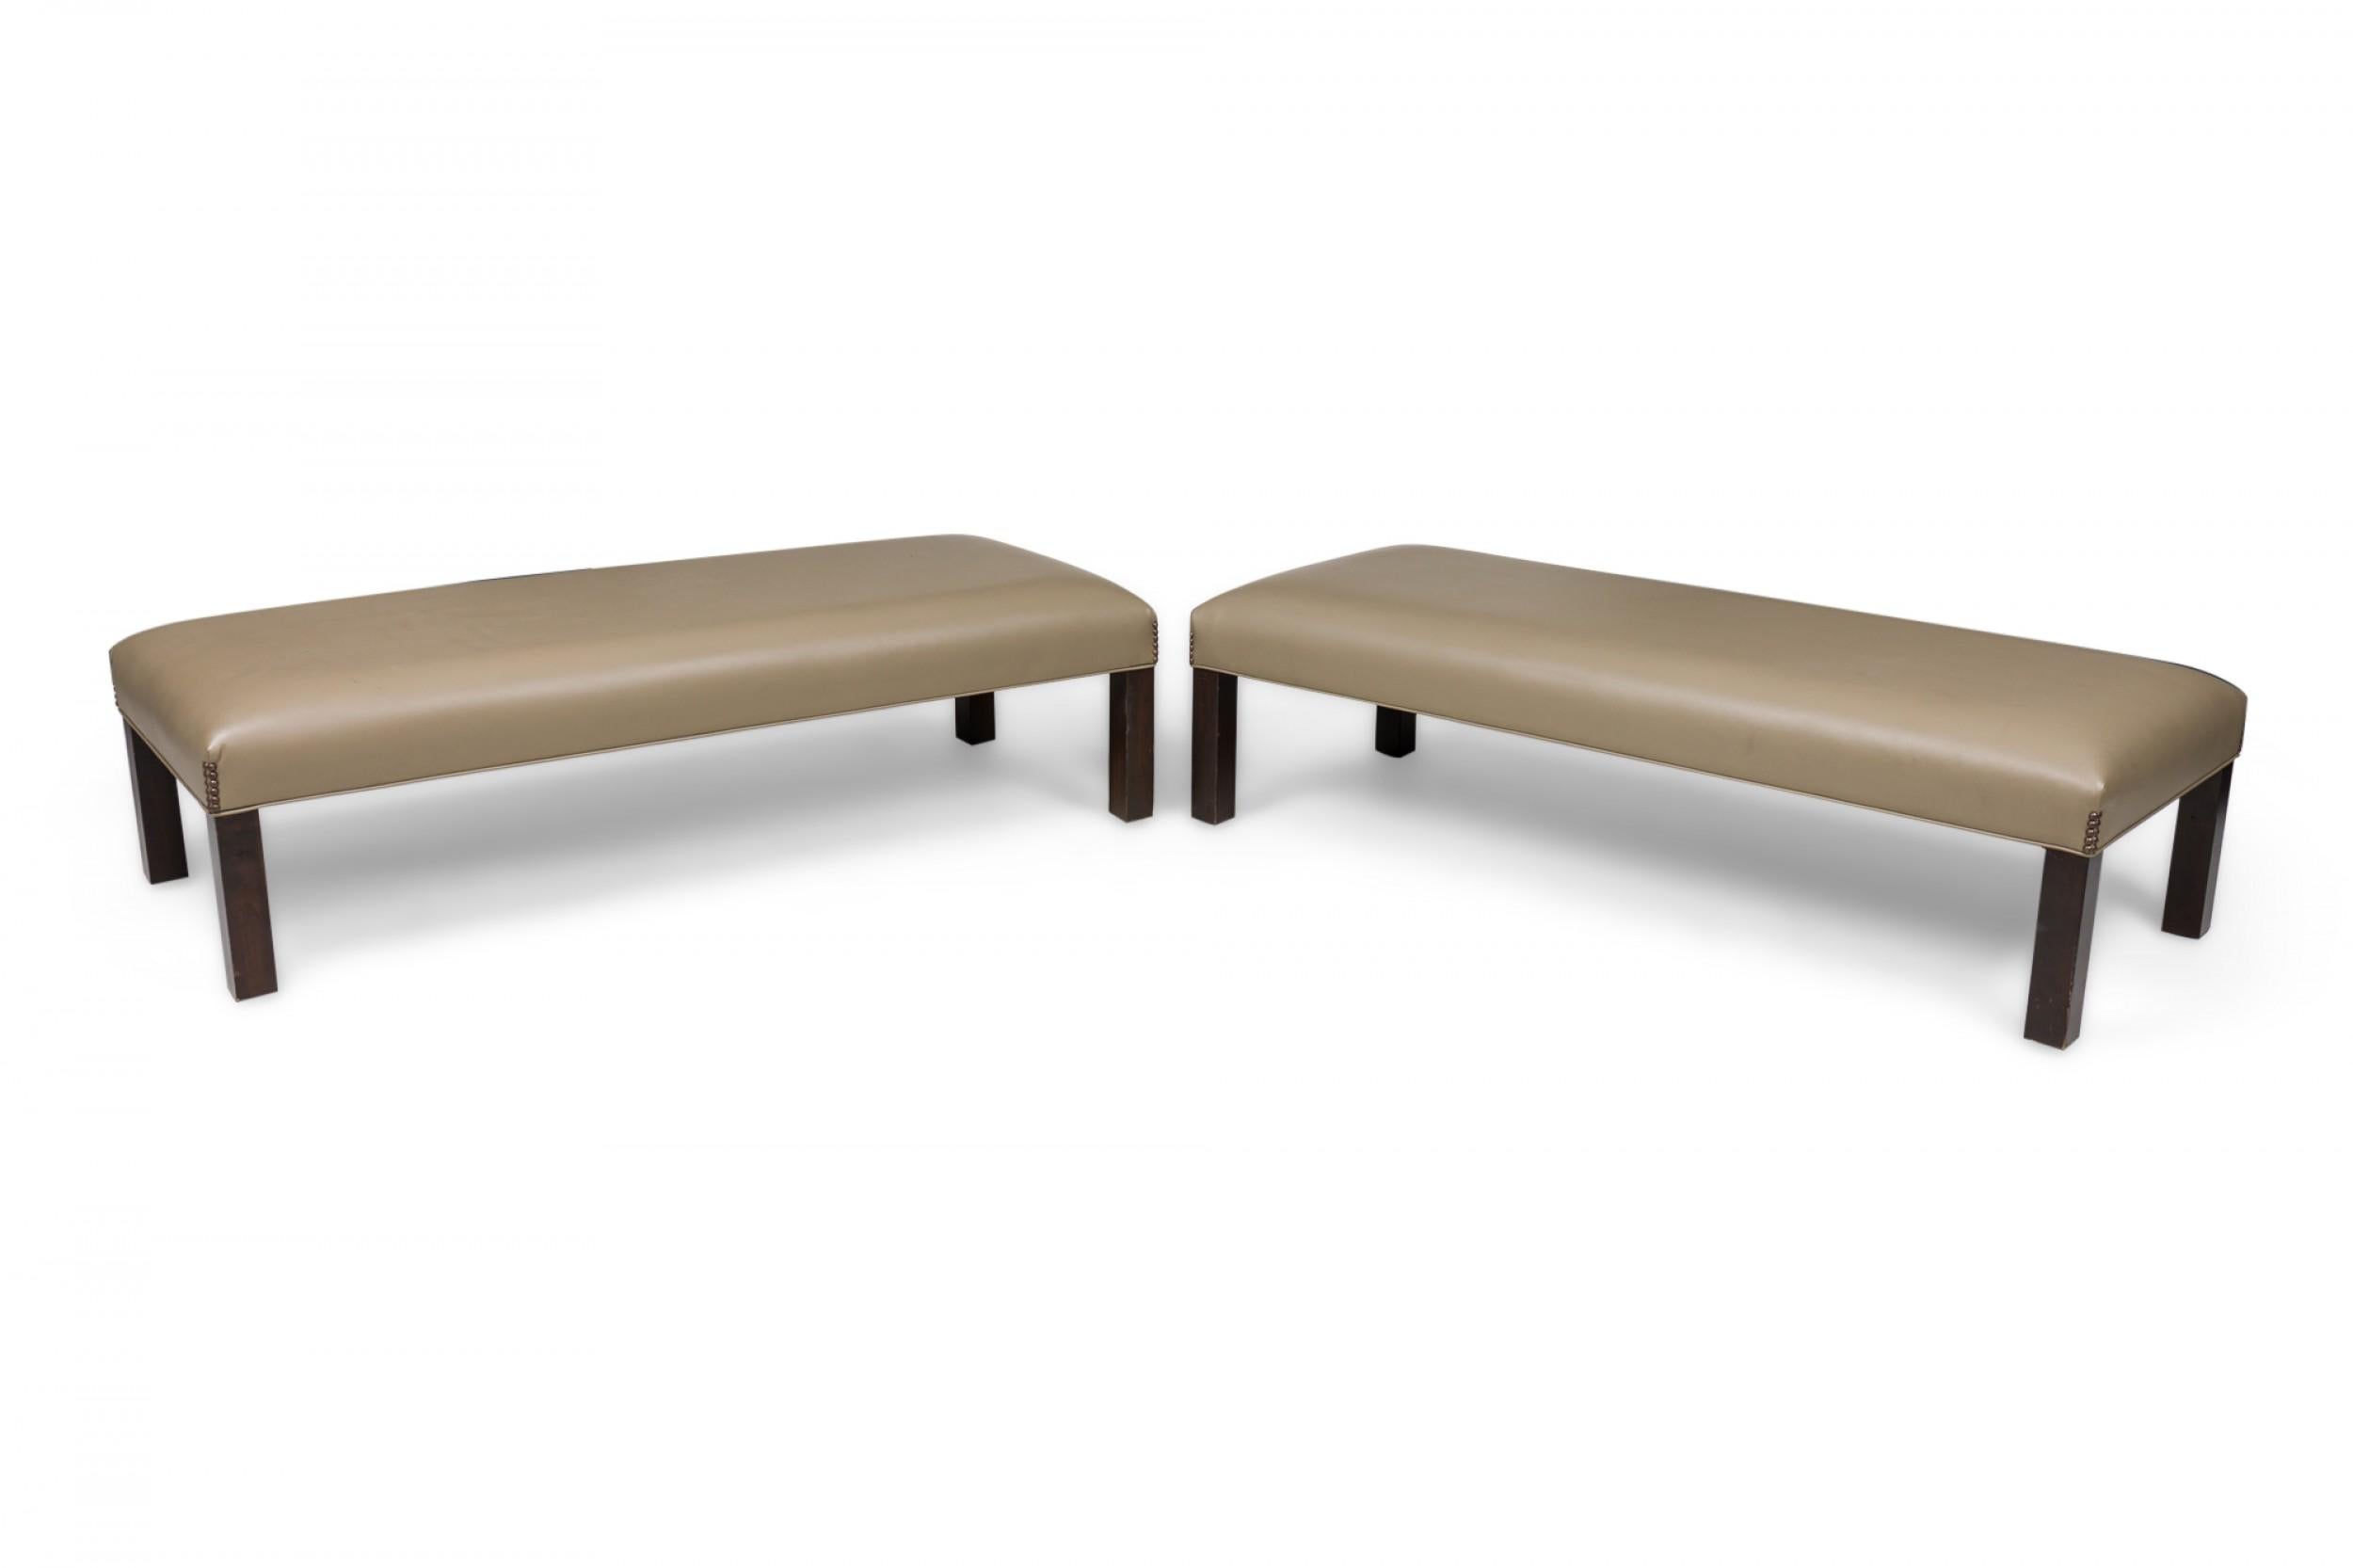 PAIR of Contemporary rectangular benches with taupe leather upholstered tops with bronze upholstery nail detail on each corner, resting on four square wooden legs with a dark wood veneer. (PRICED AS PAIR).